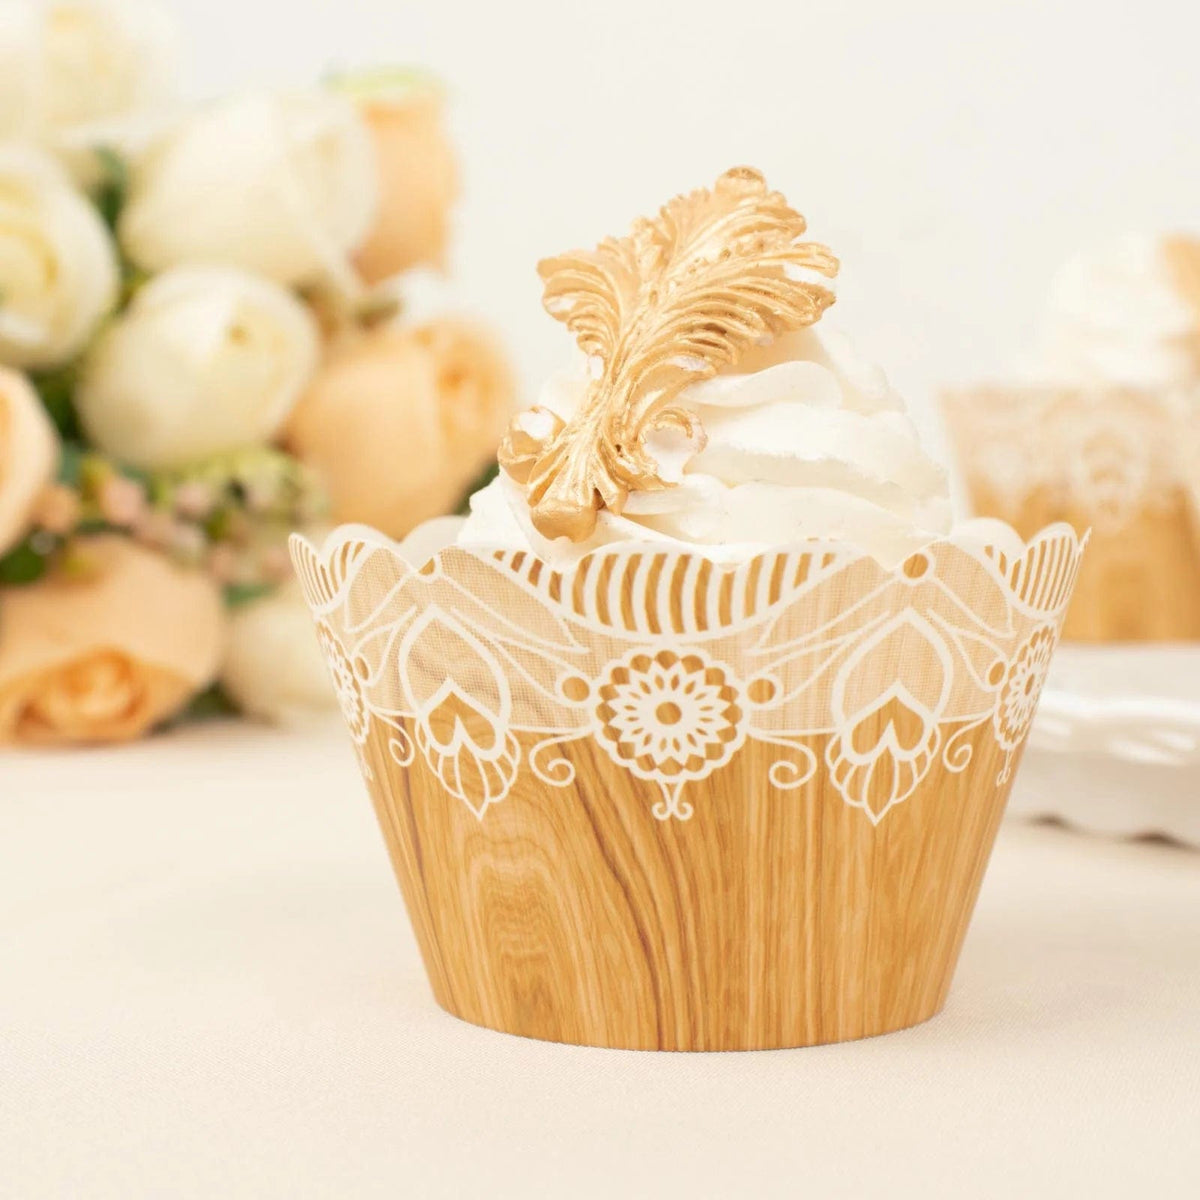 25 Natural White Paper Cupcake Wrappers Wood Lace Print Muffin Liners